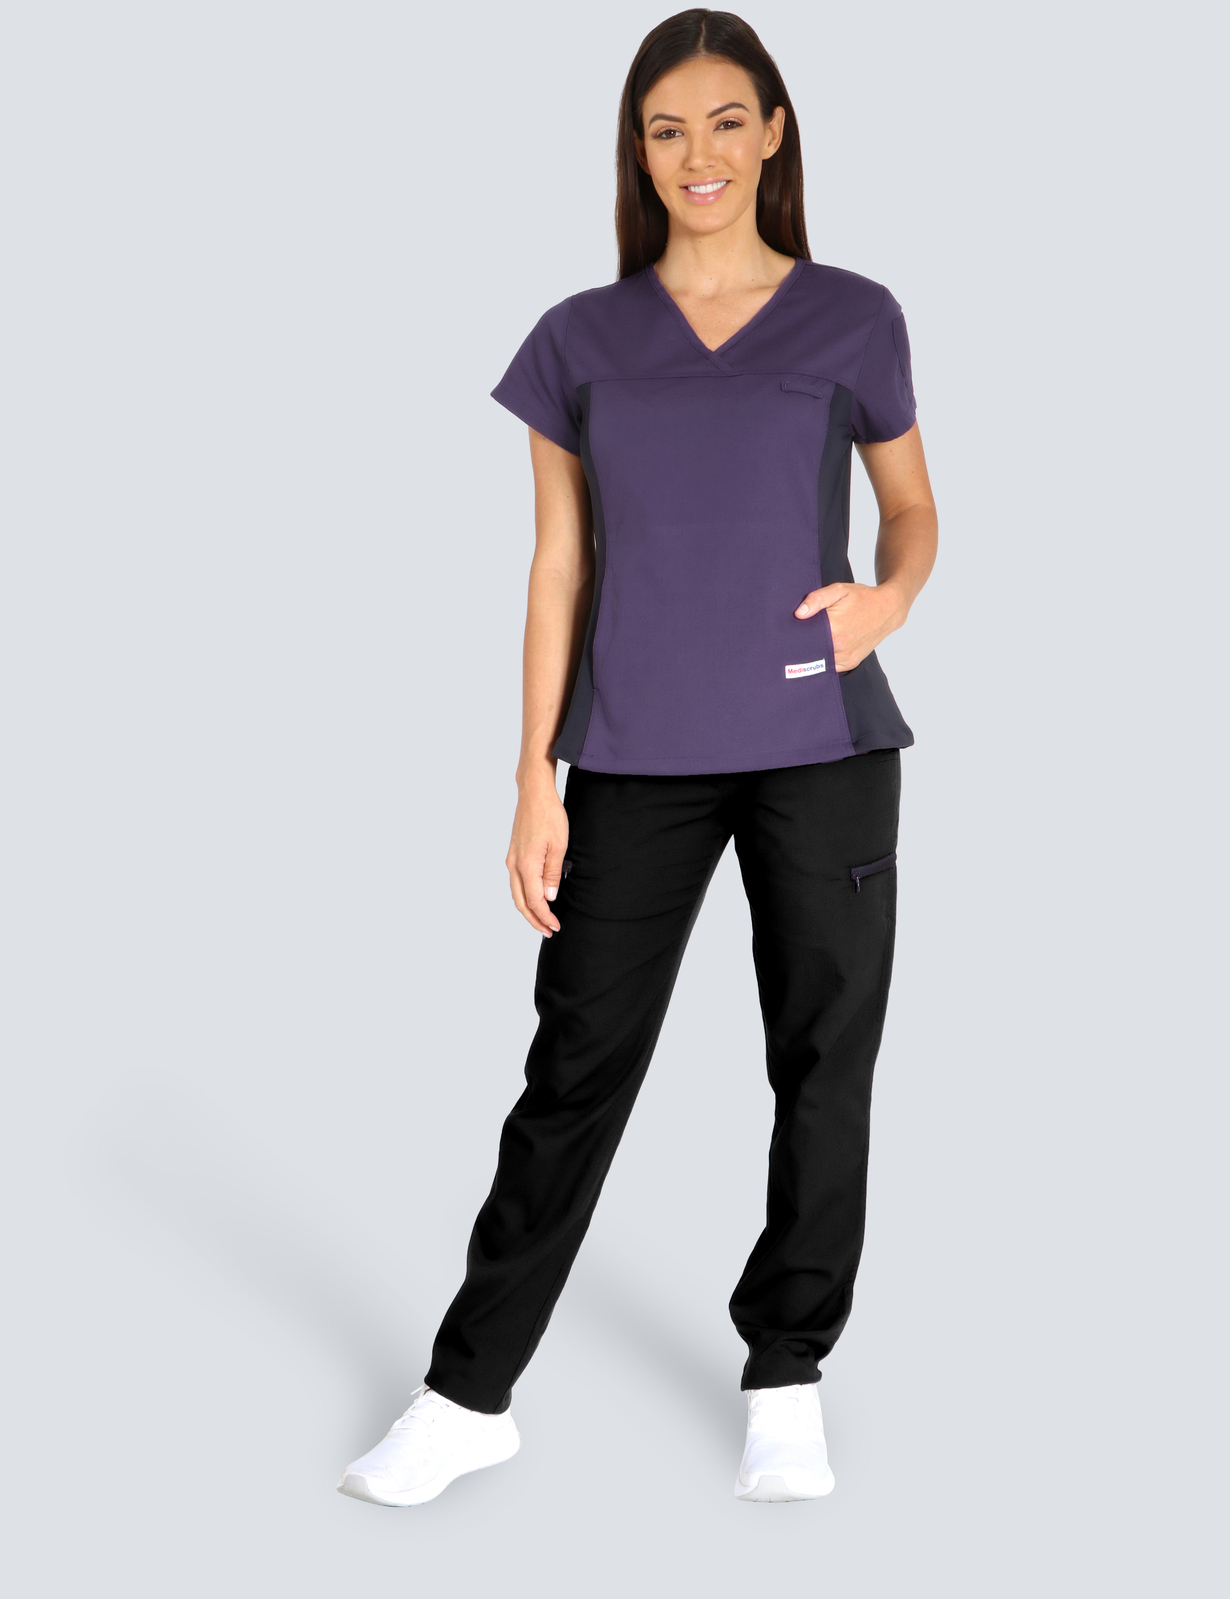 Pathology North (Women's Fit Spandex Scrub Top in Aubergine and Cargo Pants in Black incl Logos)